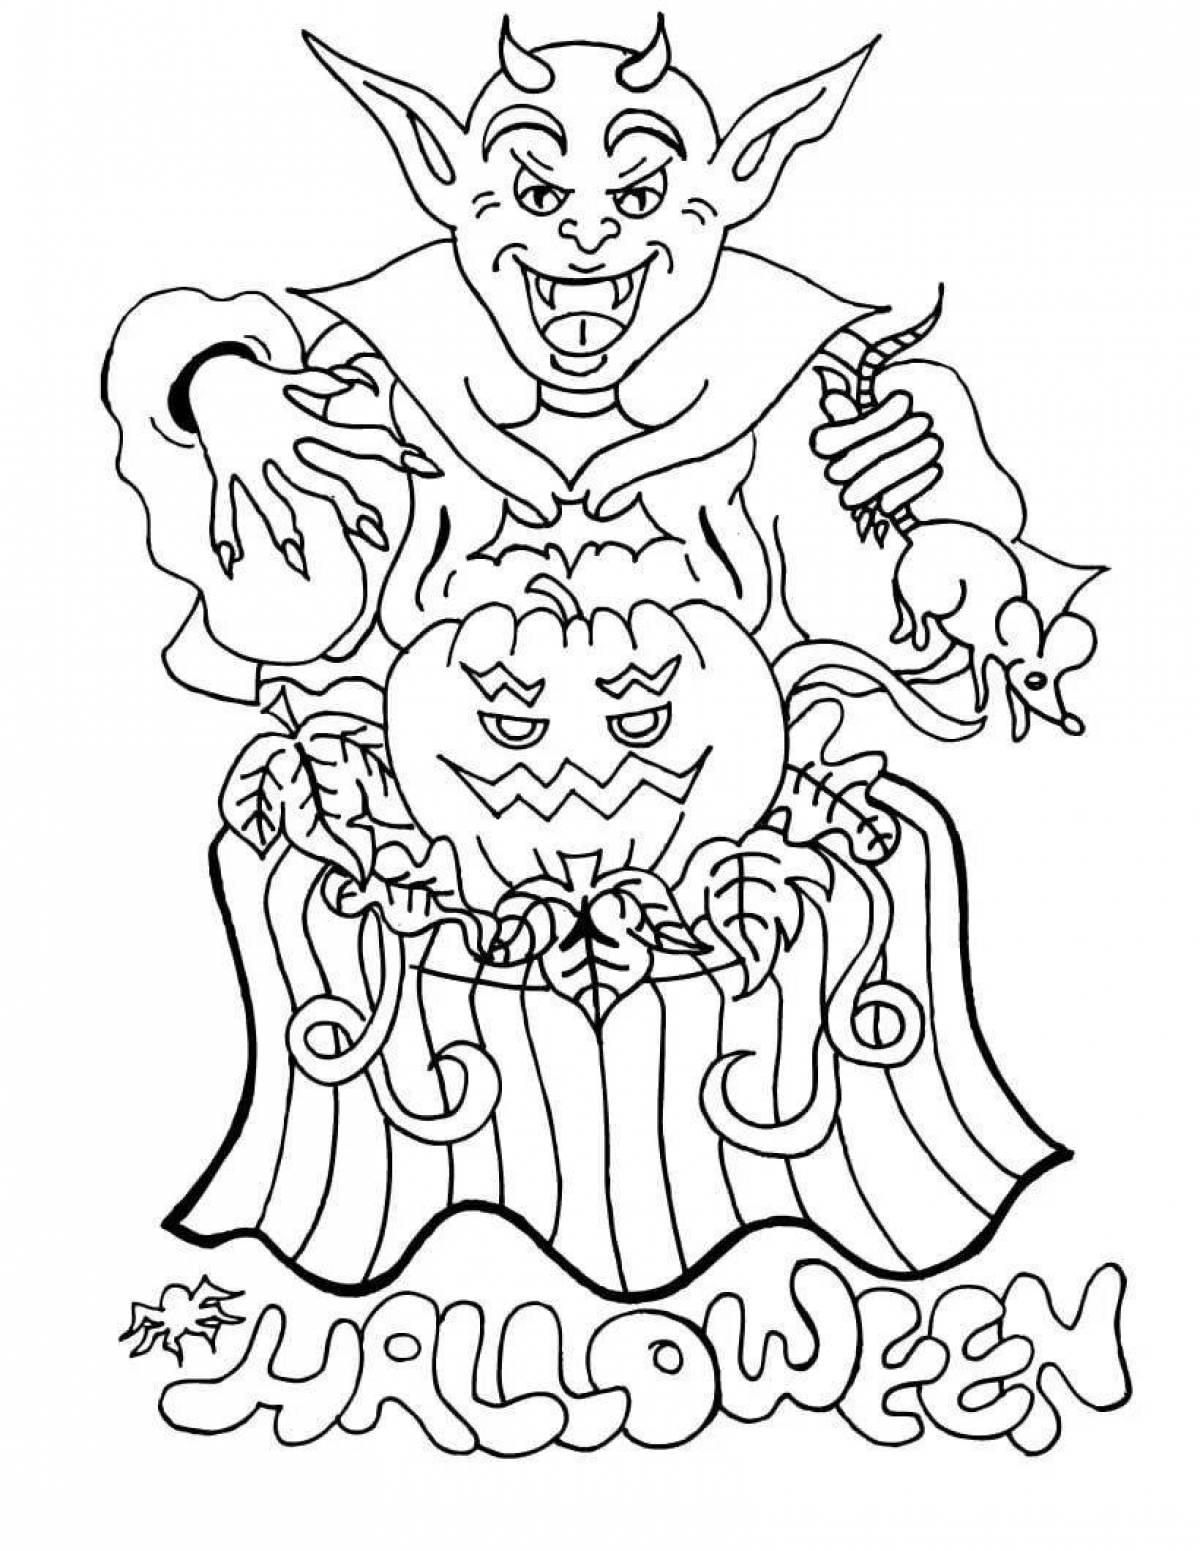 Coloring page terrible scary child